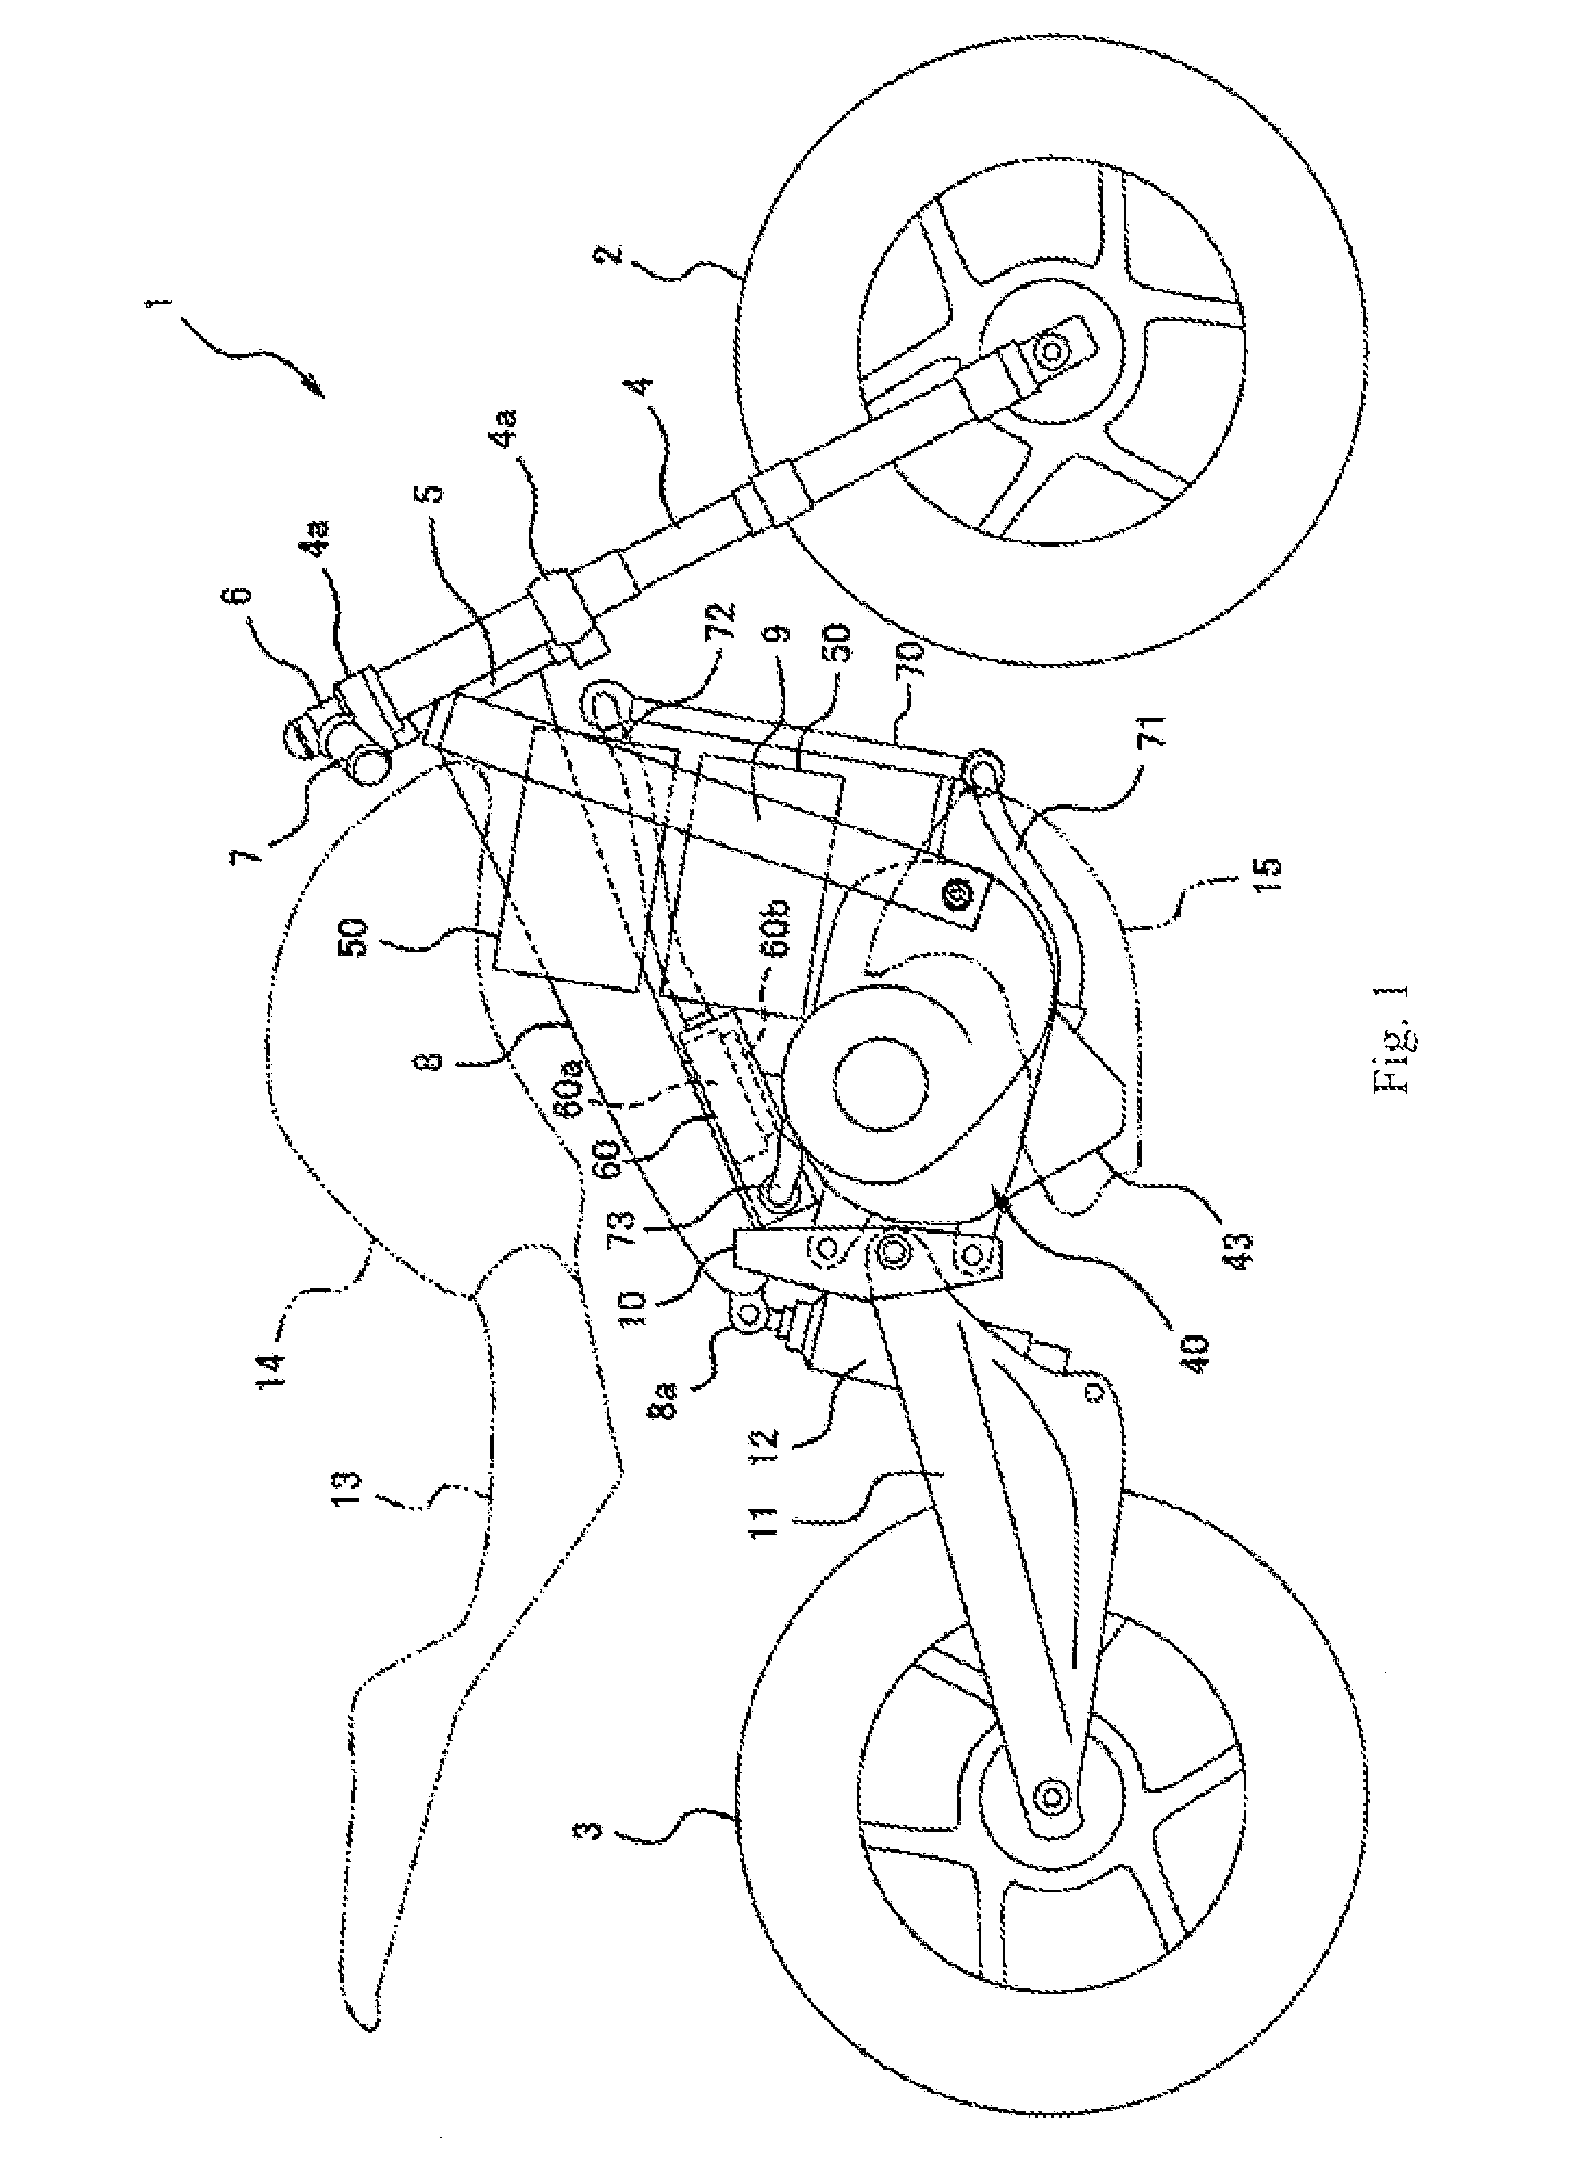 Cooling structure for electric vehicle